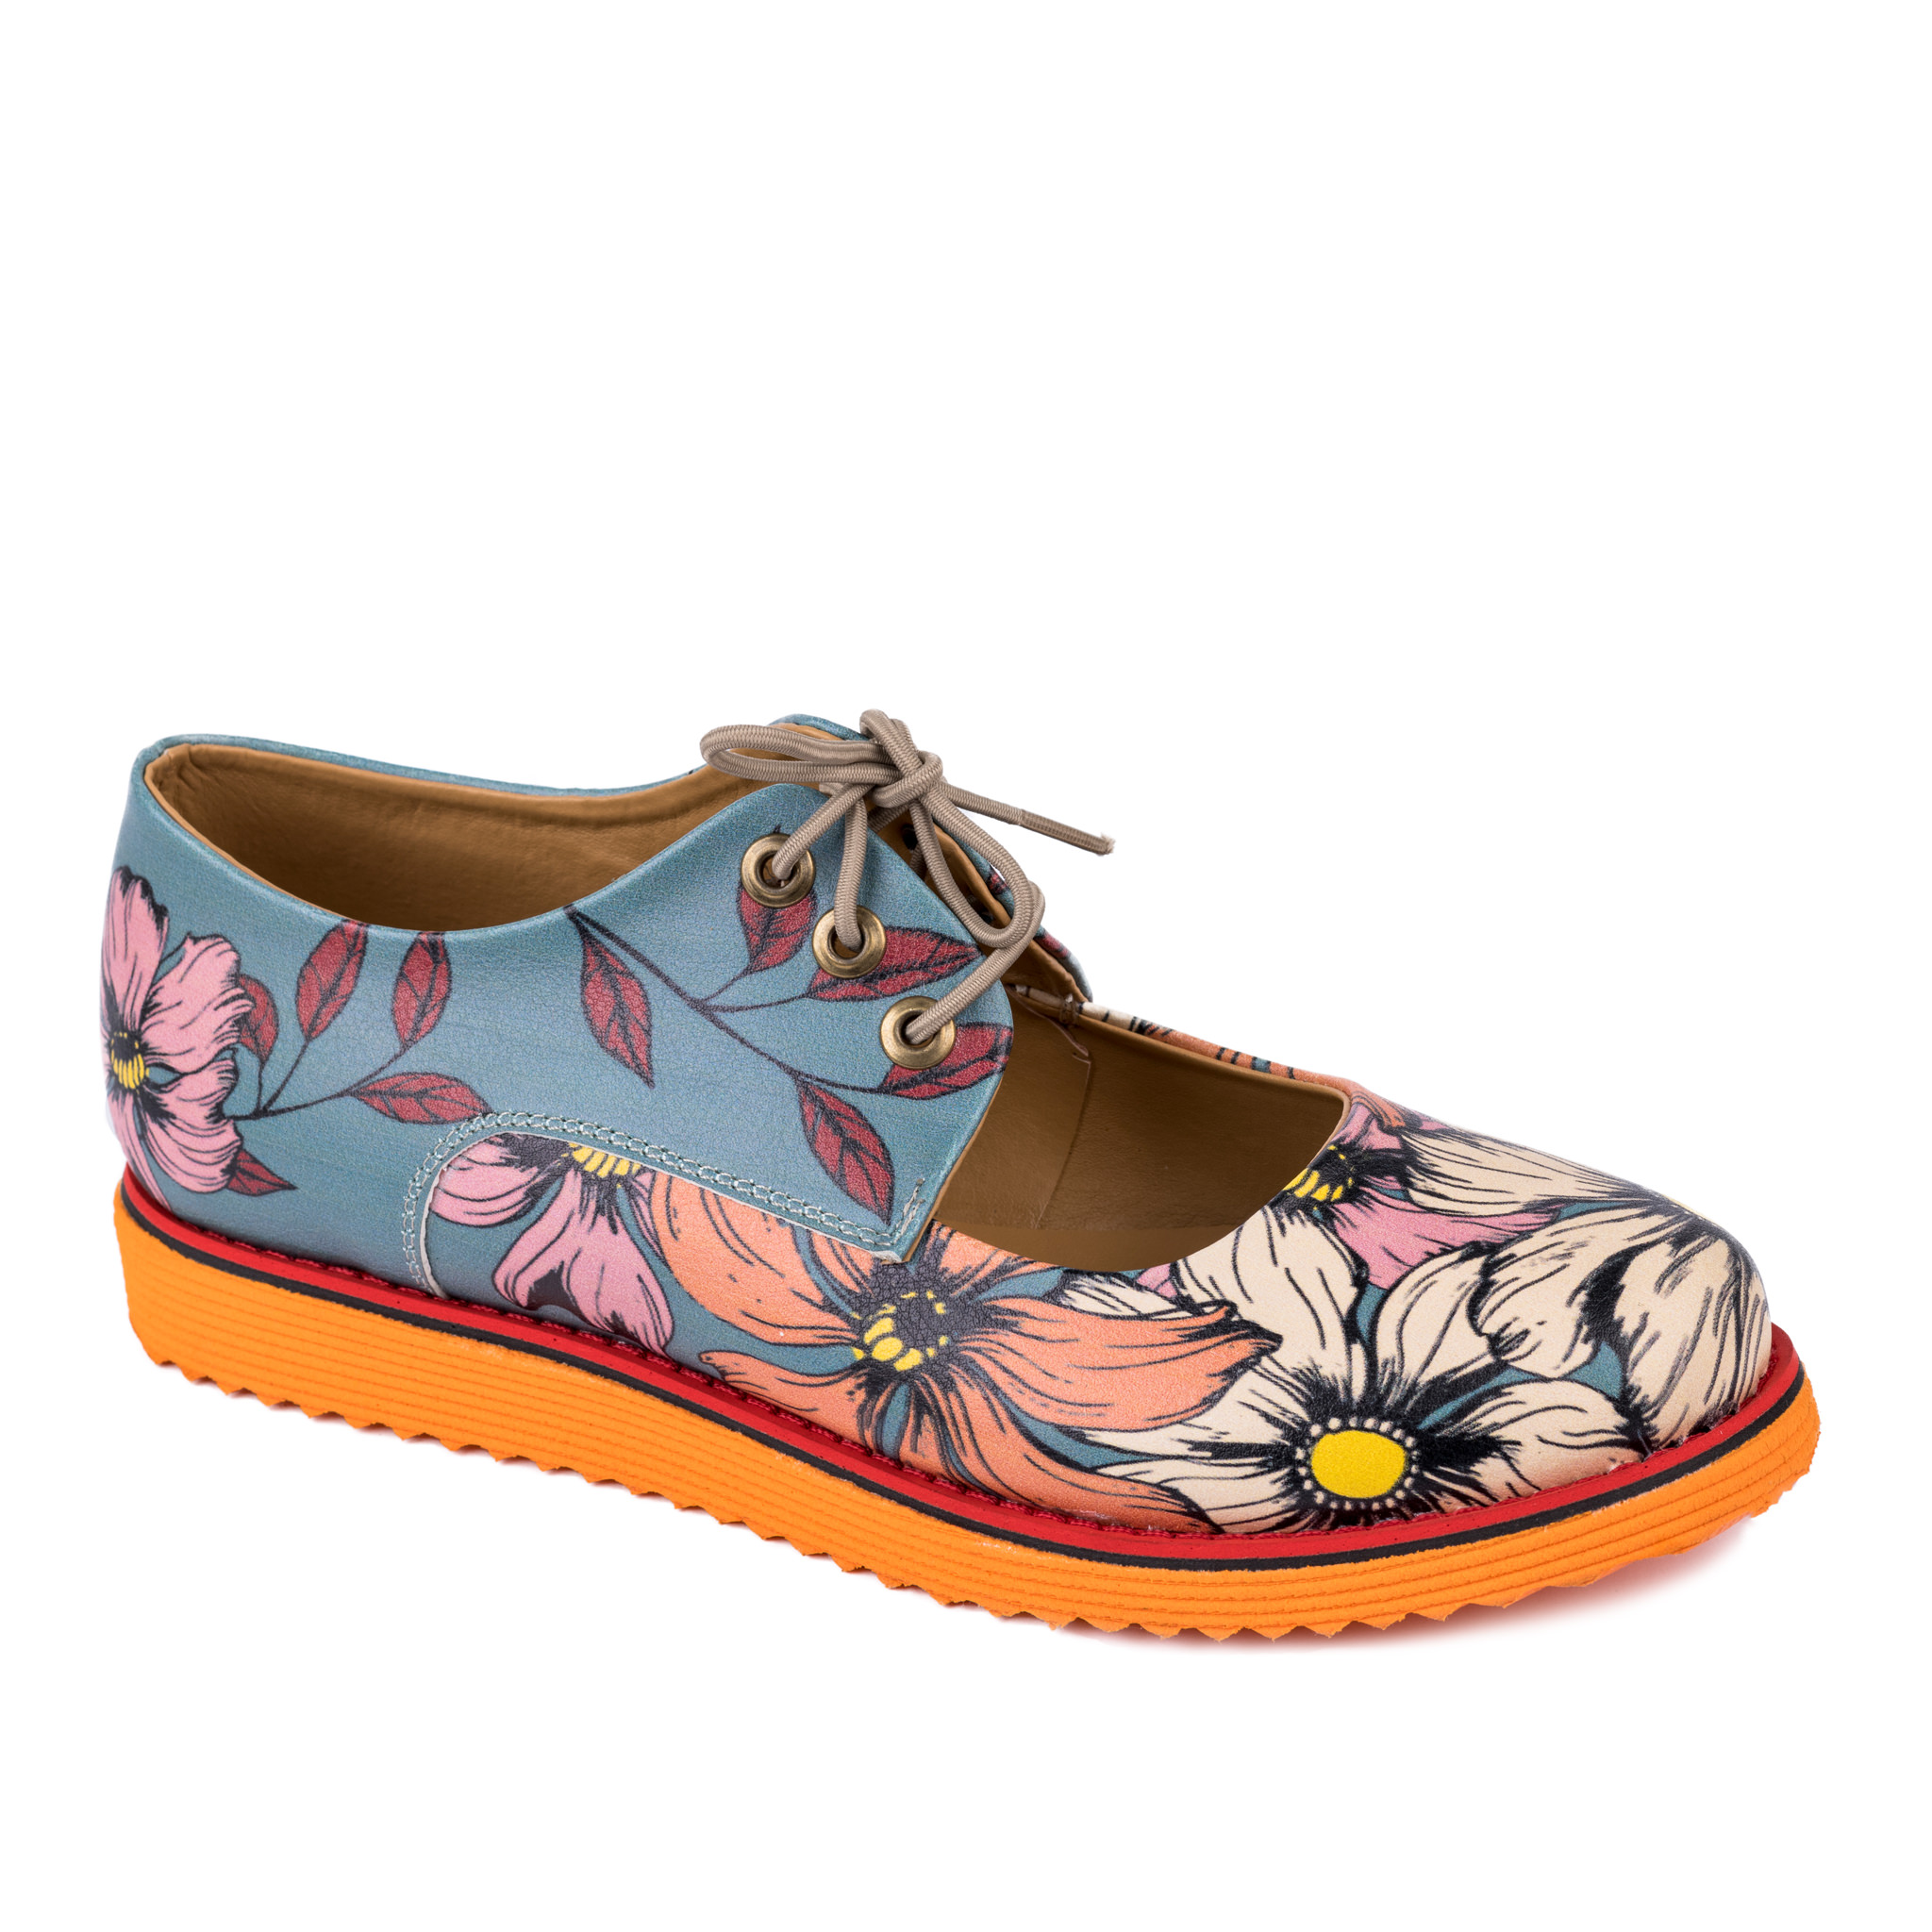 LACE UP SHOES WITH FLOWER PRINT - BLUE